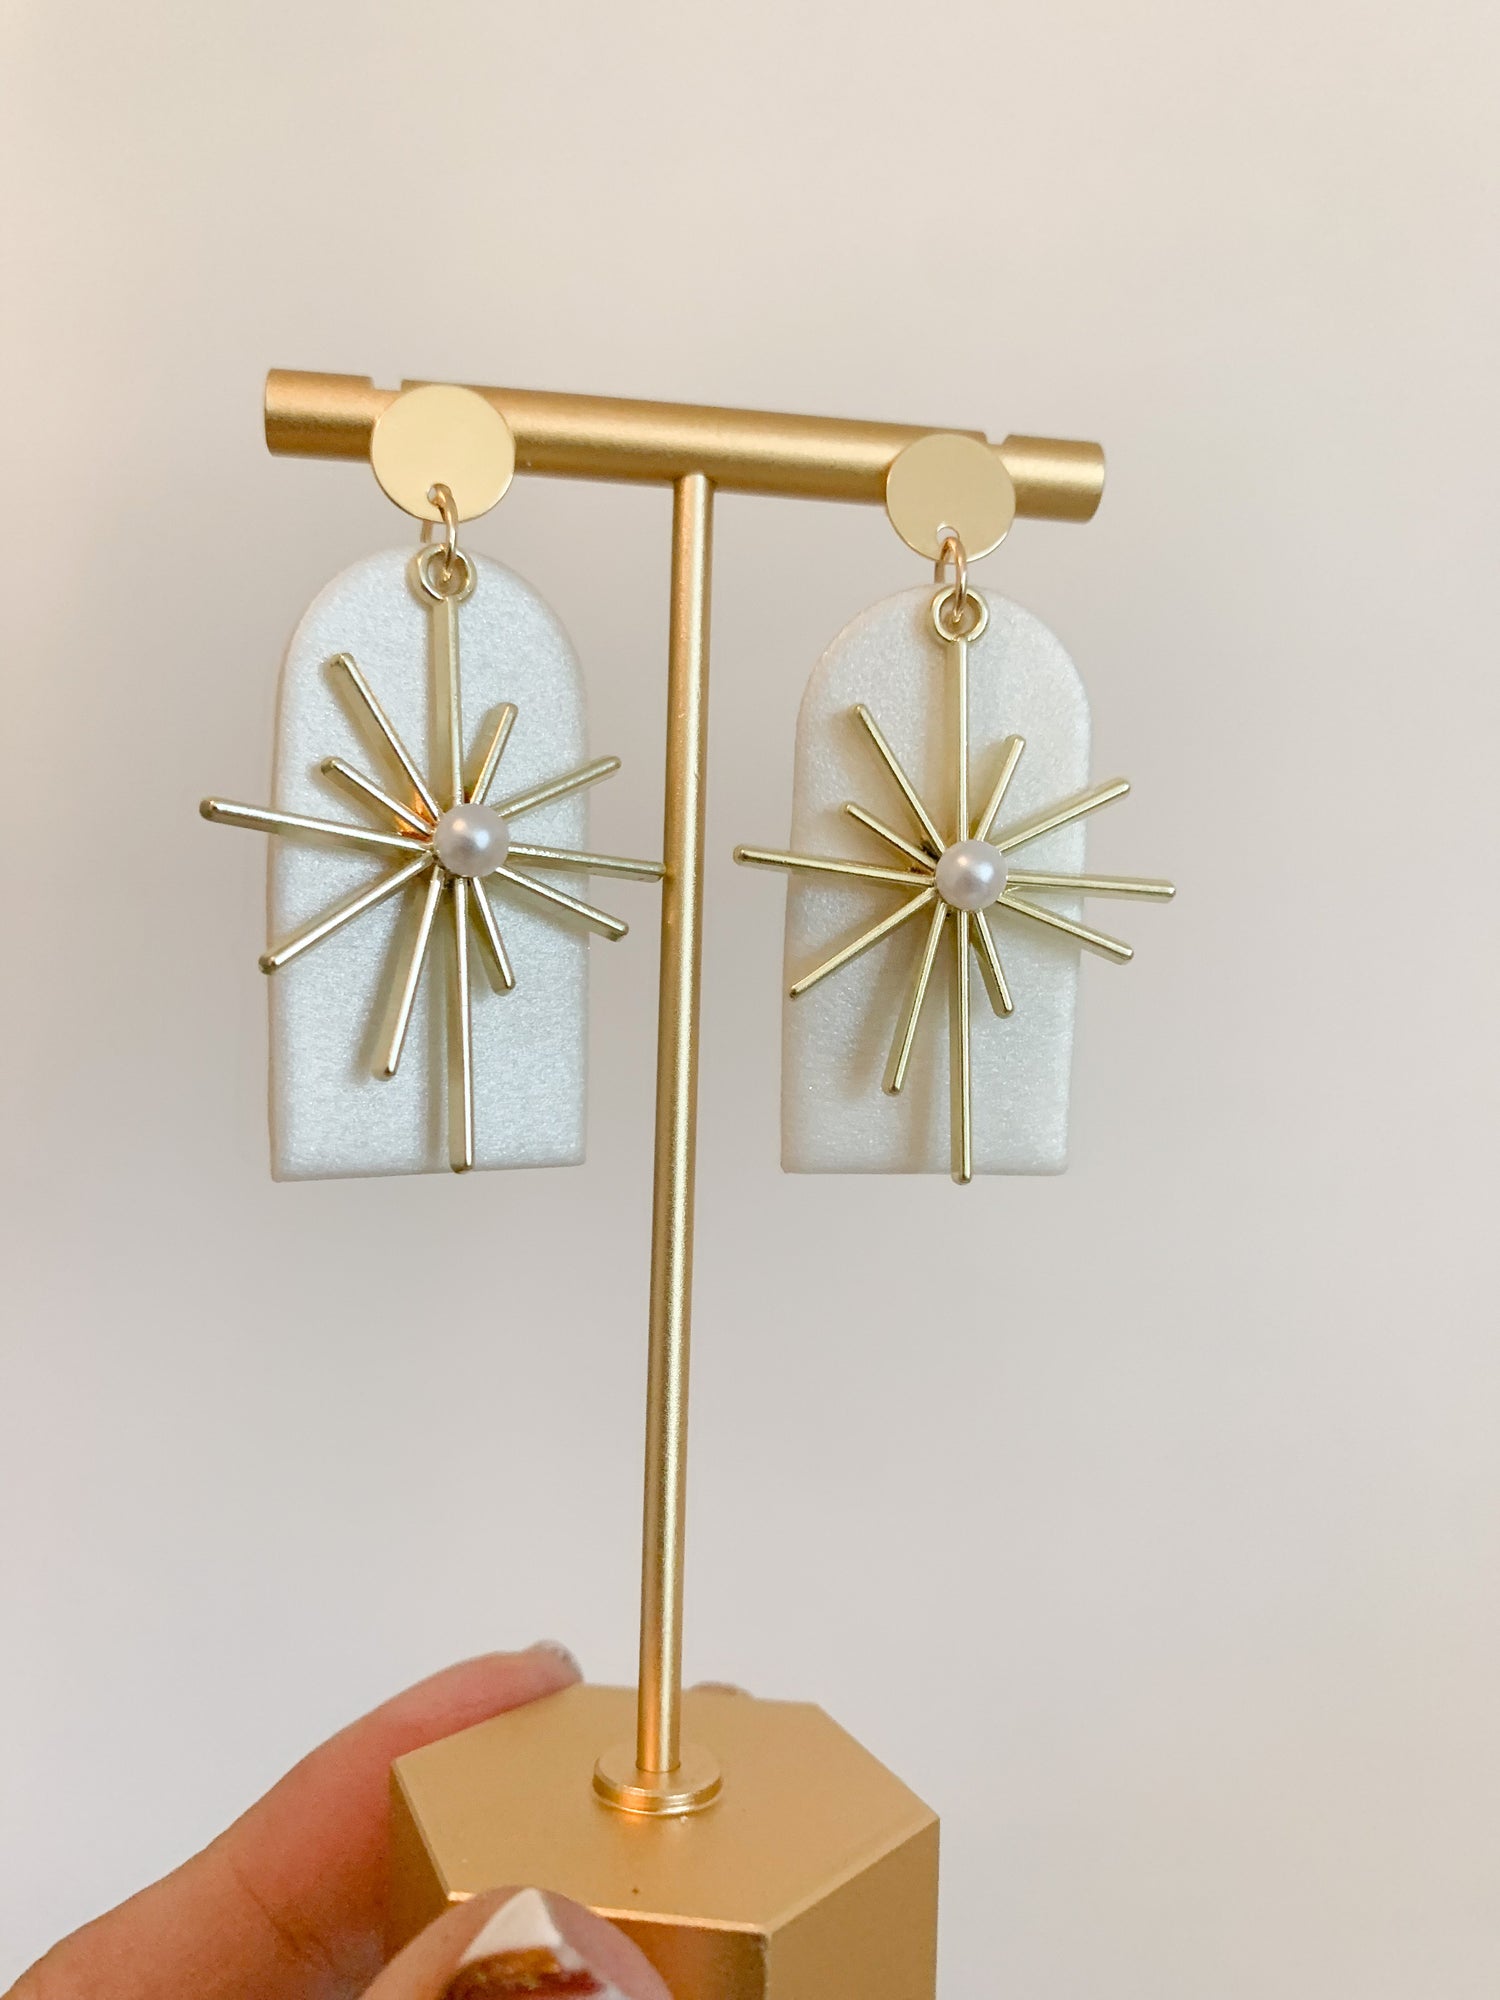 Handmade polymer clay earrings with a freshwater pearl and 18k gold plated earring posts. Perfect for adding sophistication to any look.